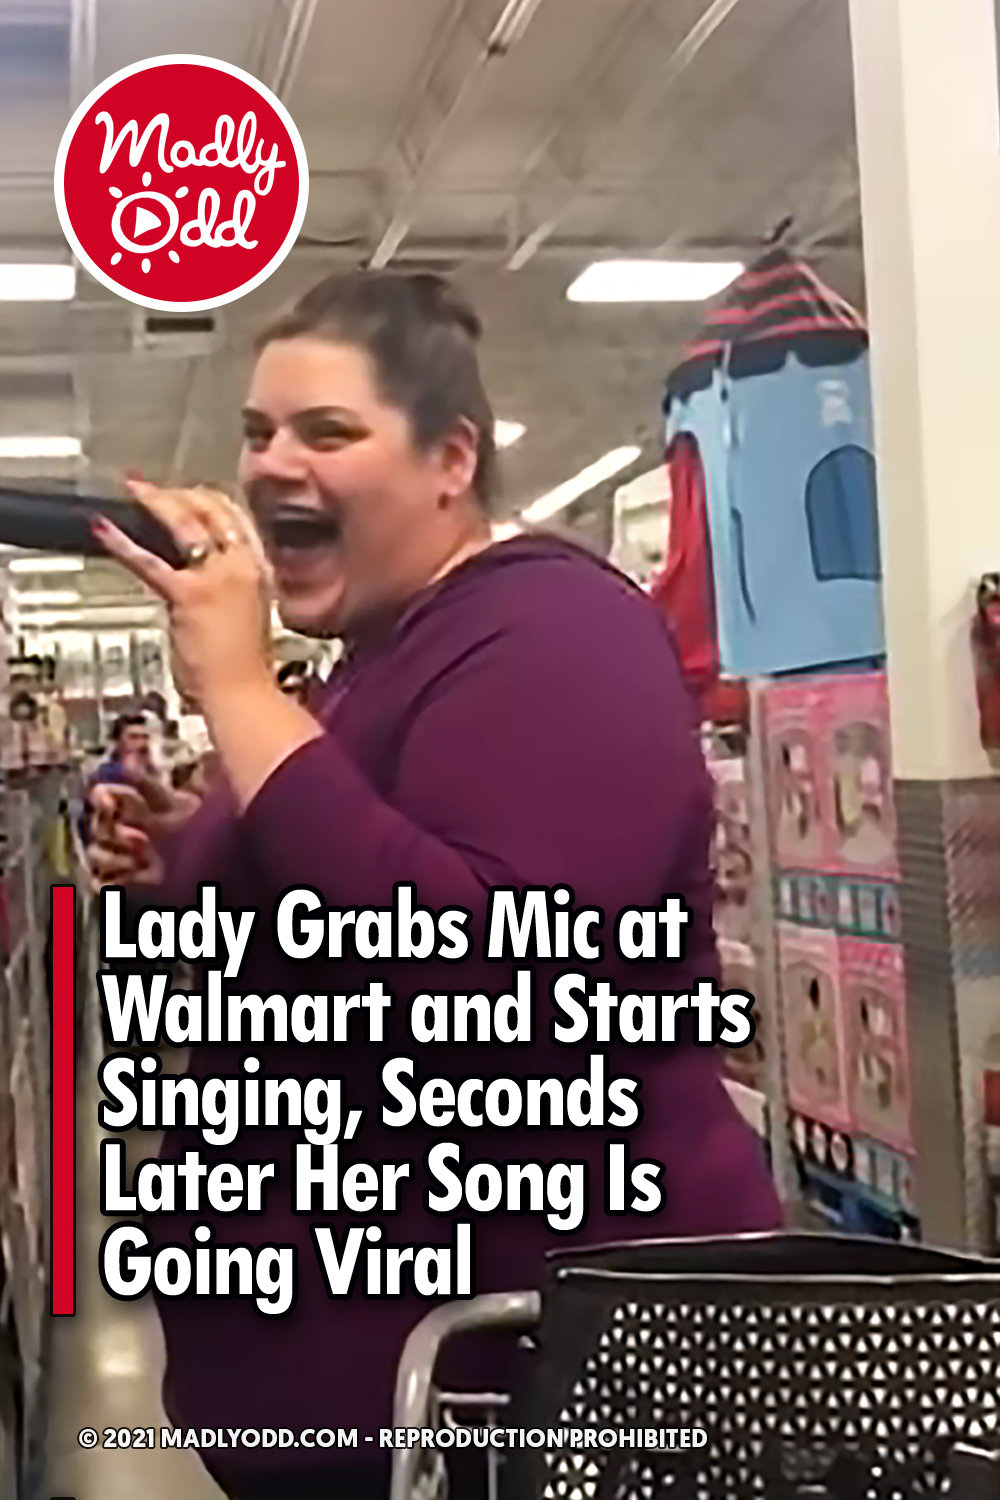 Lady Grabs Mic at Walmart and Starts Singing, Seconds Later Her Song Is Going Viral